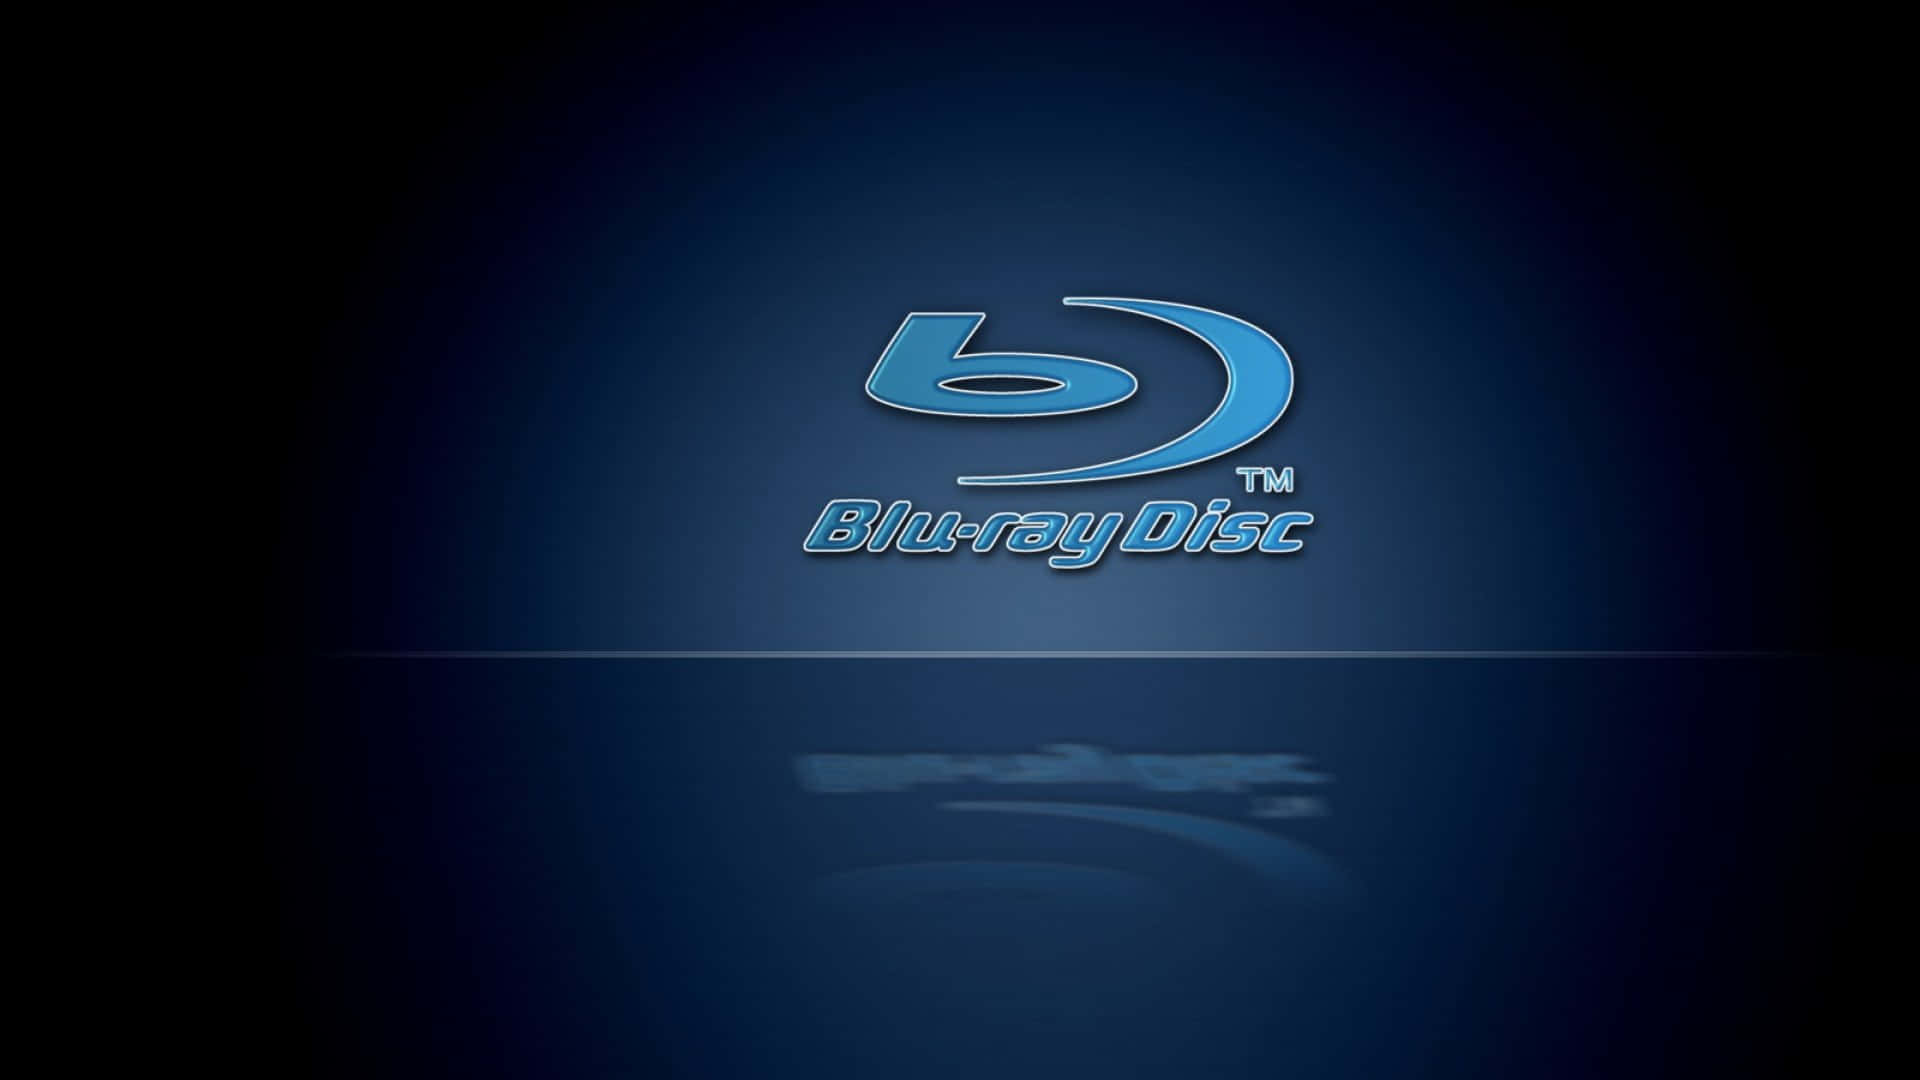 Enjoy HD videos with the latest Blu-Ray technology. Wallpaper